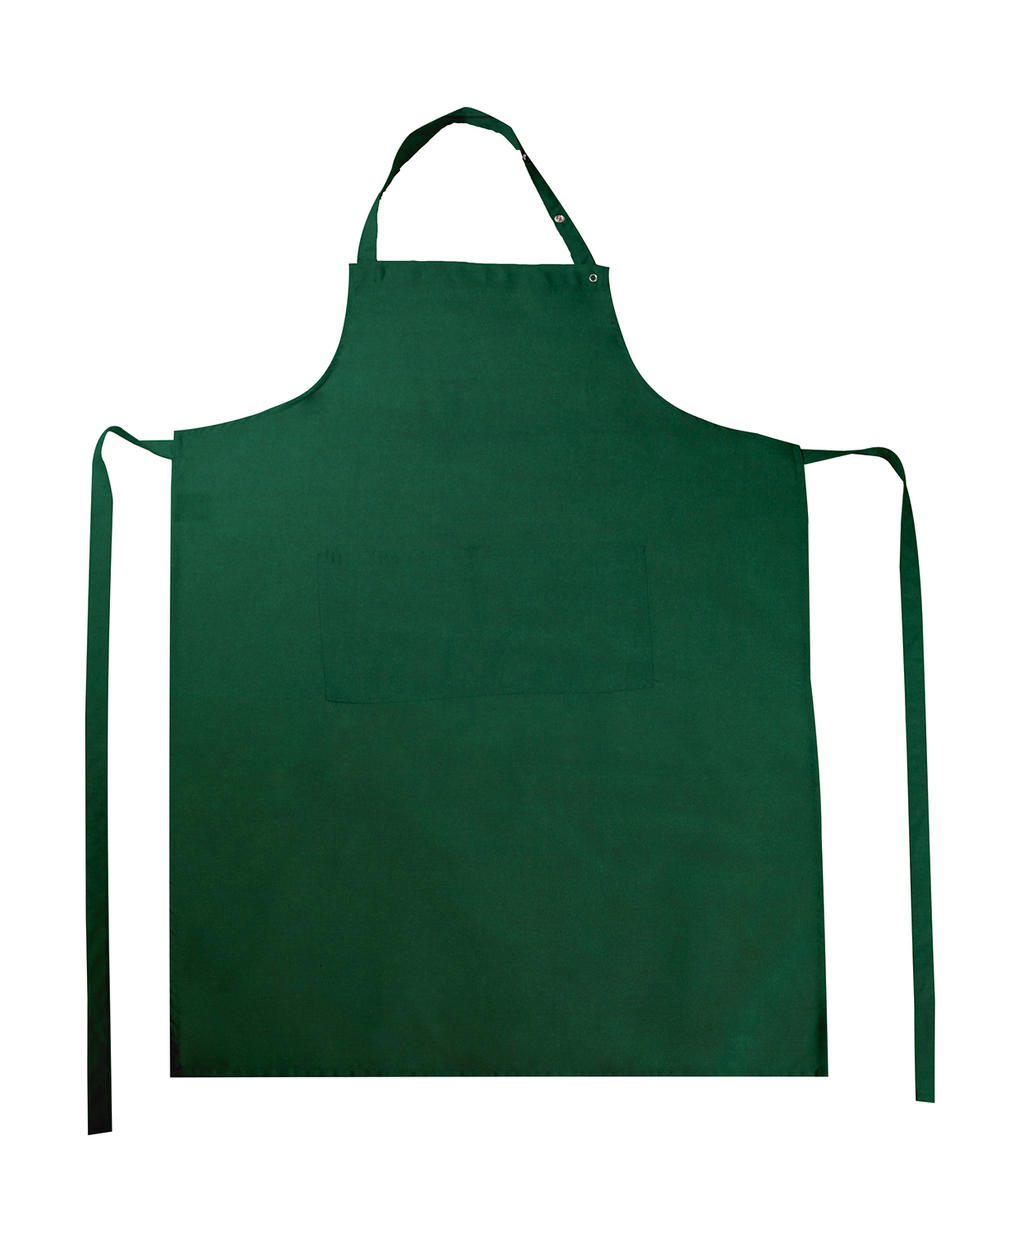  Amsterdam Bib Apron with Pocket in Farbe Bottle Green